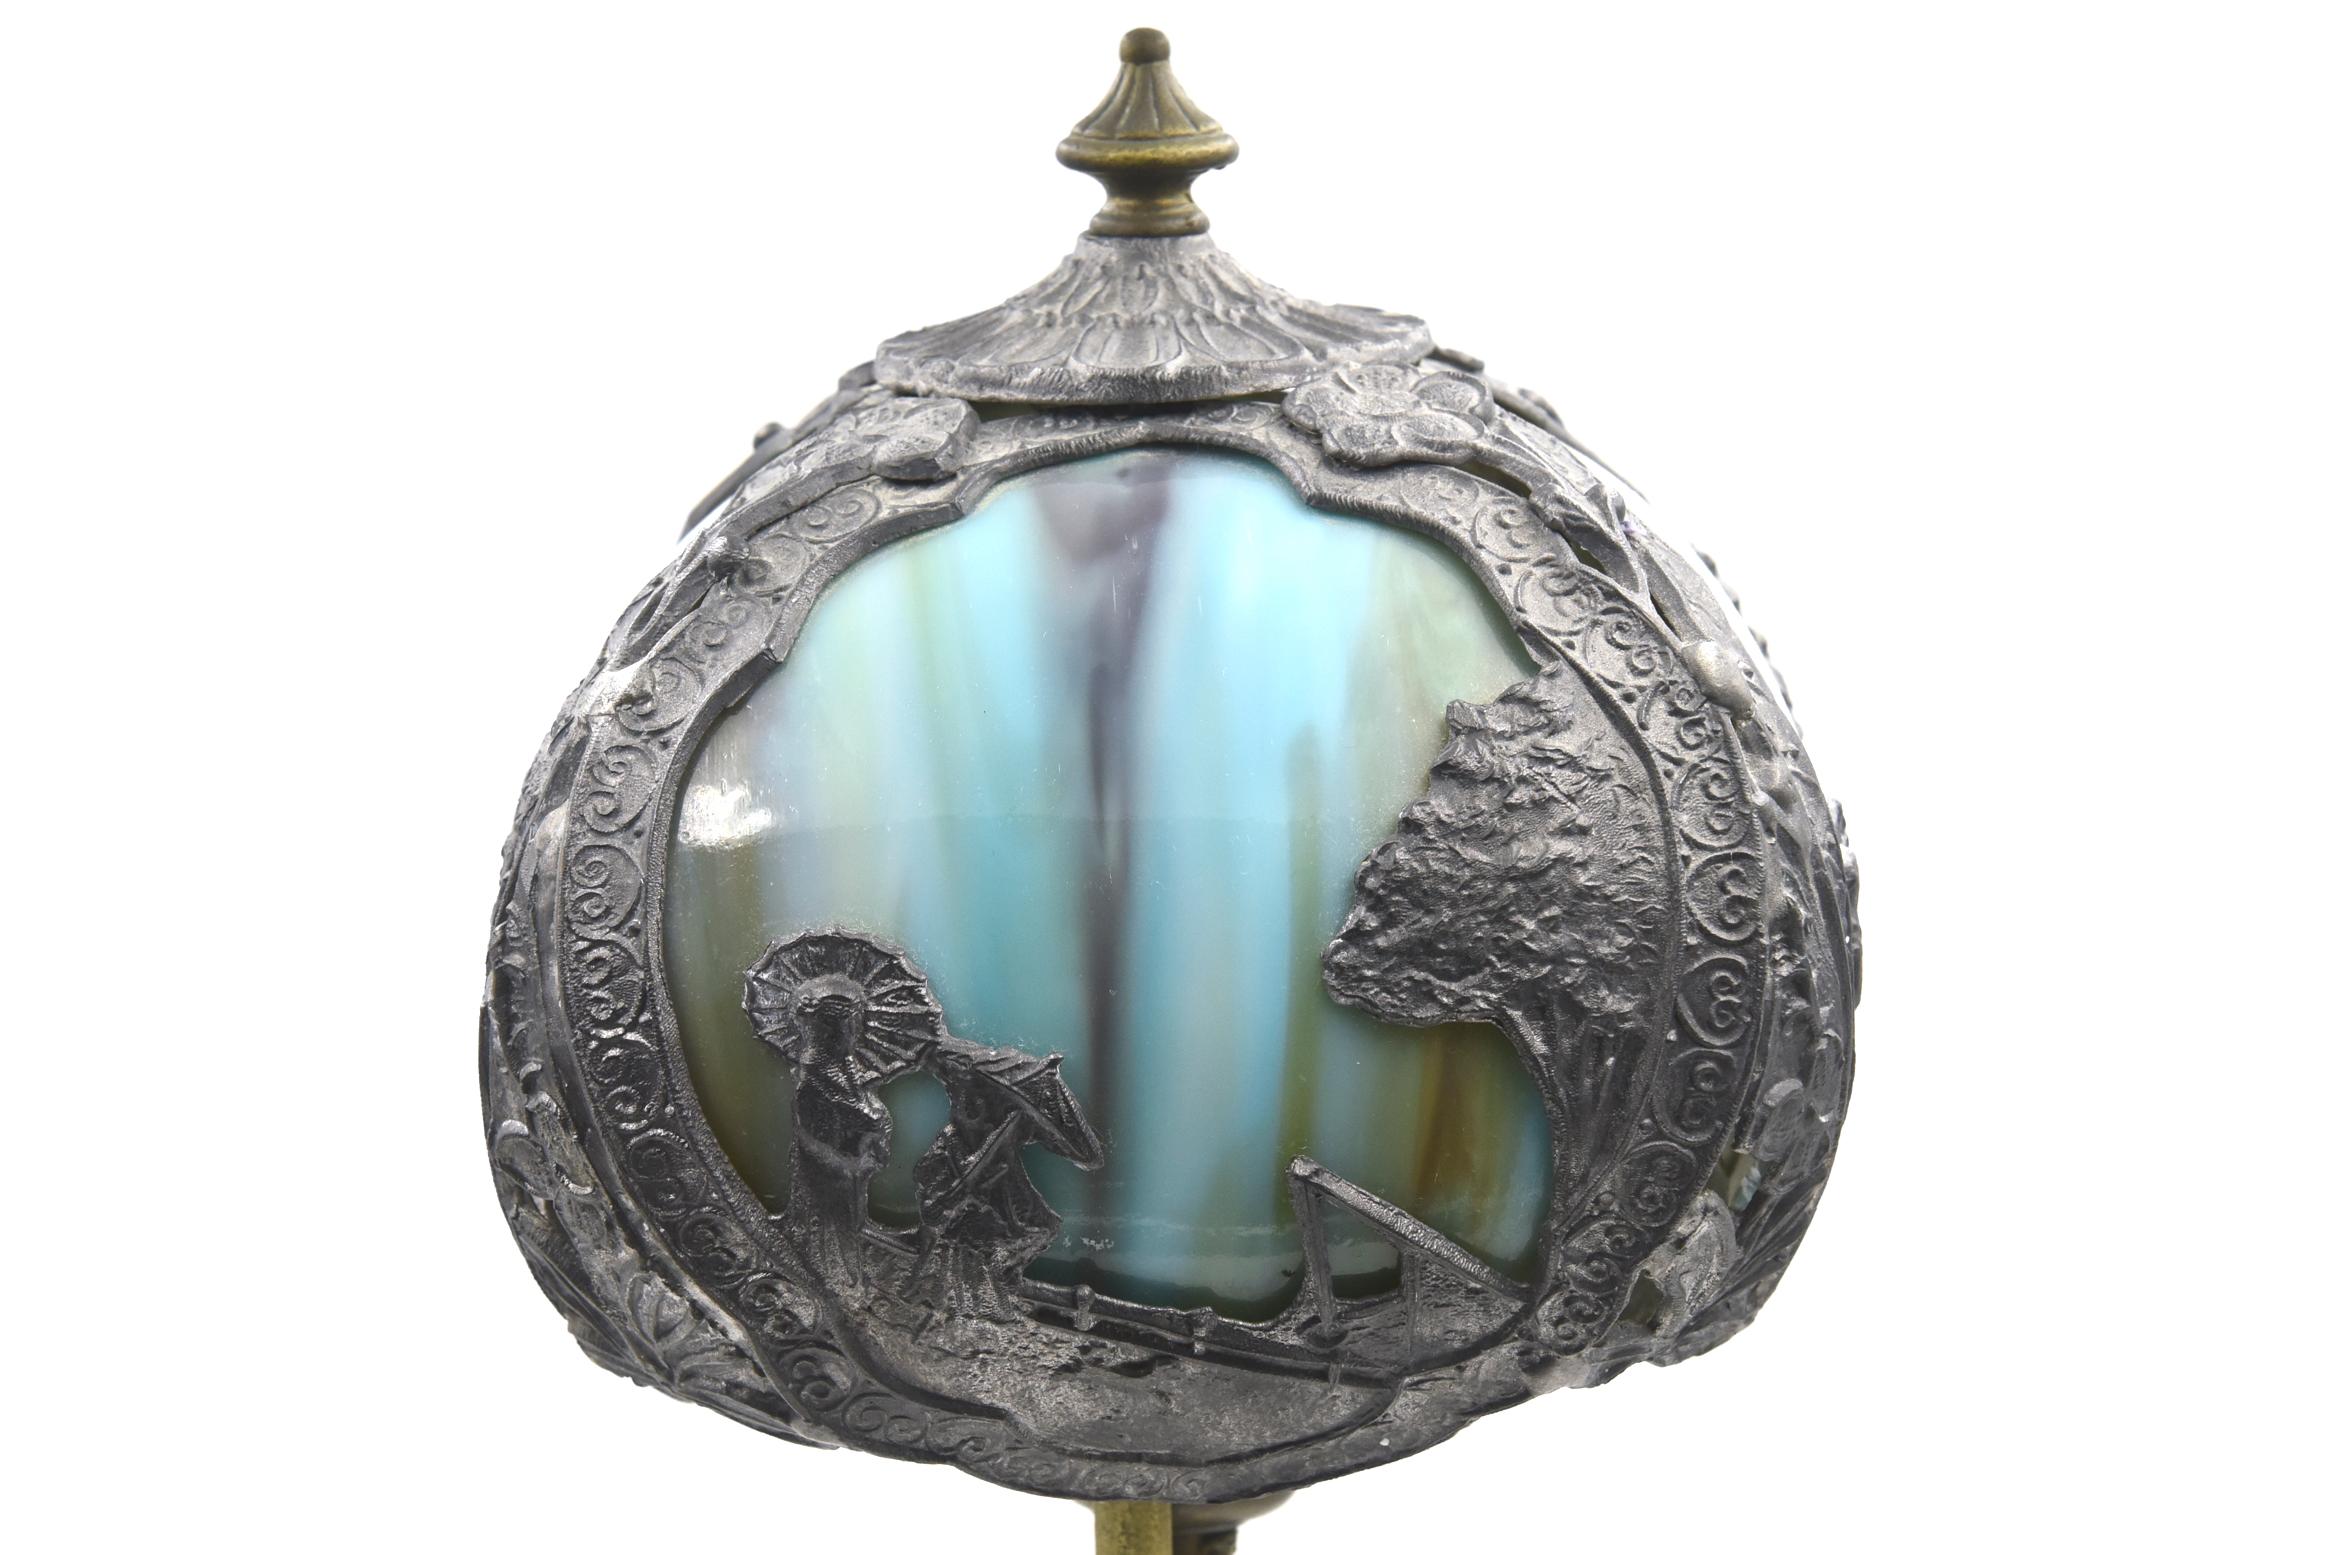 Early 20th century metal table, parlor or boudoir lamp featuring an Oriental motif lined with four bent slag glass blue and green panels. The scene illustrates two woman talking under umbrellas with a small dog running ahead near a tree. Along the